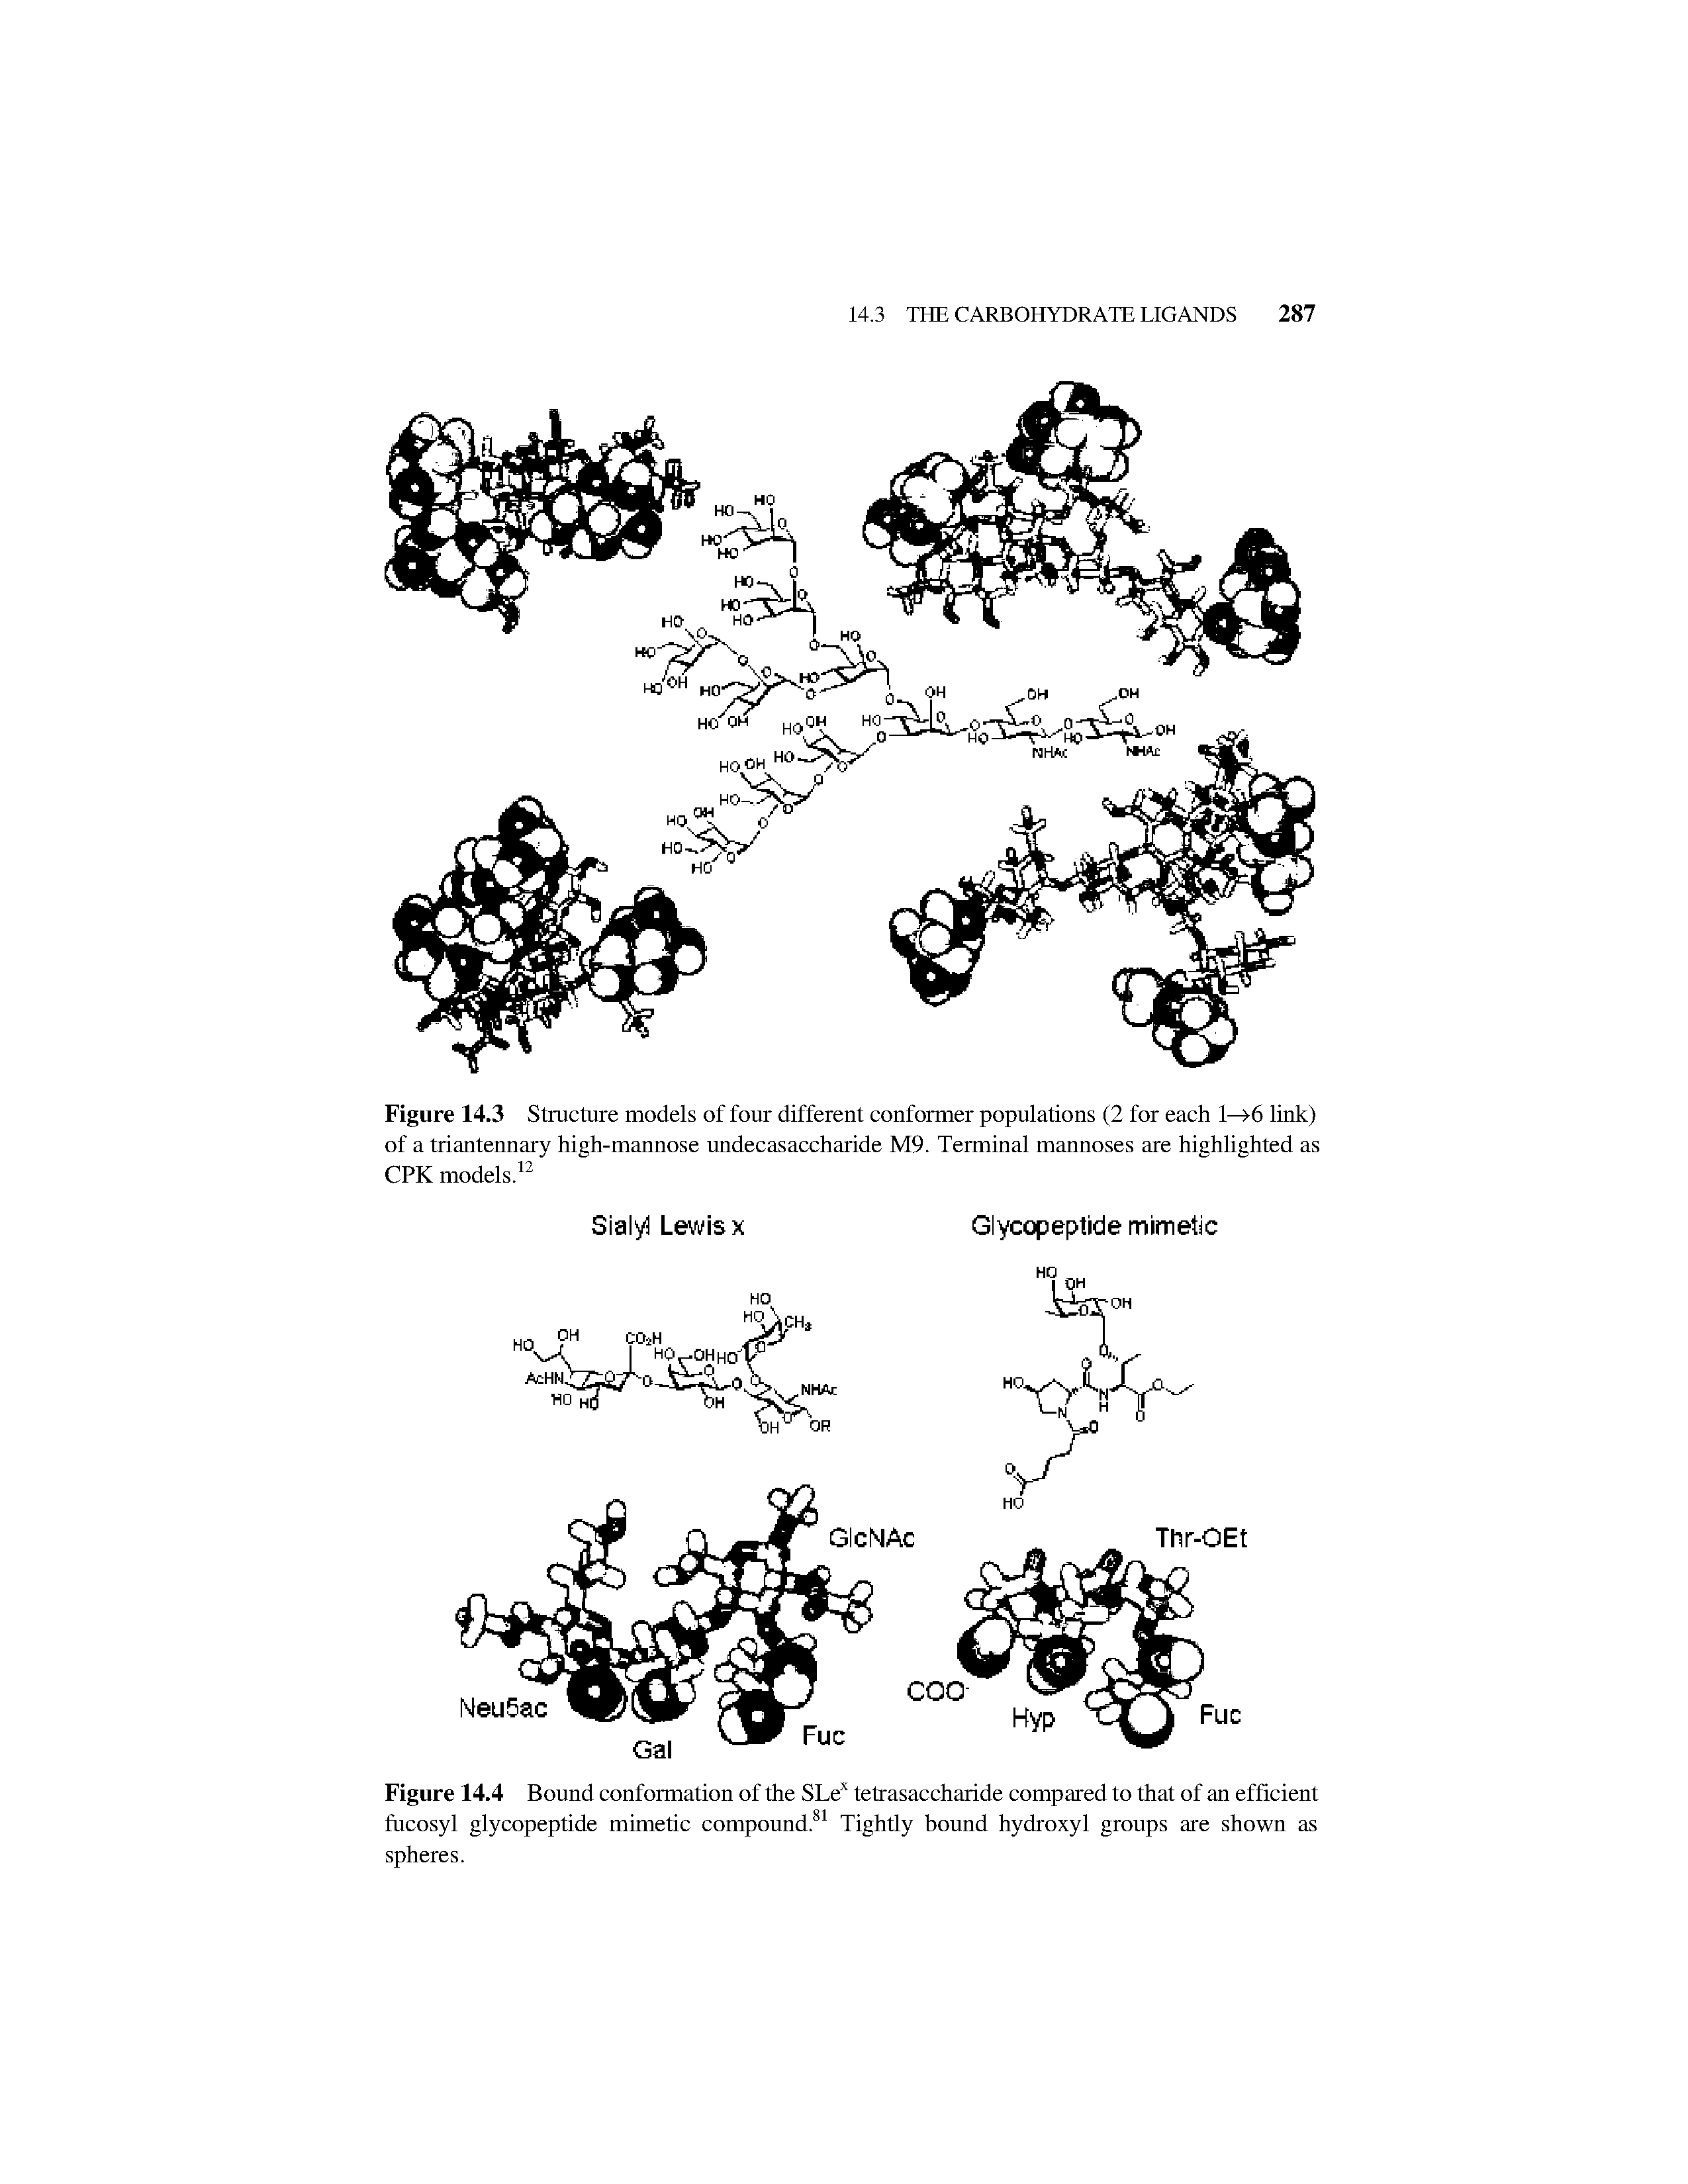 Figure 14.4 Bound conformation of the SLex tetrasaccharide compared to that of an efficient fucosyl glycopeptide mimetic compound.81 Tightly bound hydroxyl groups are shown as spheres.